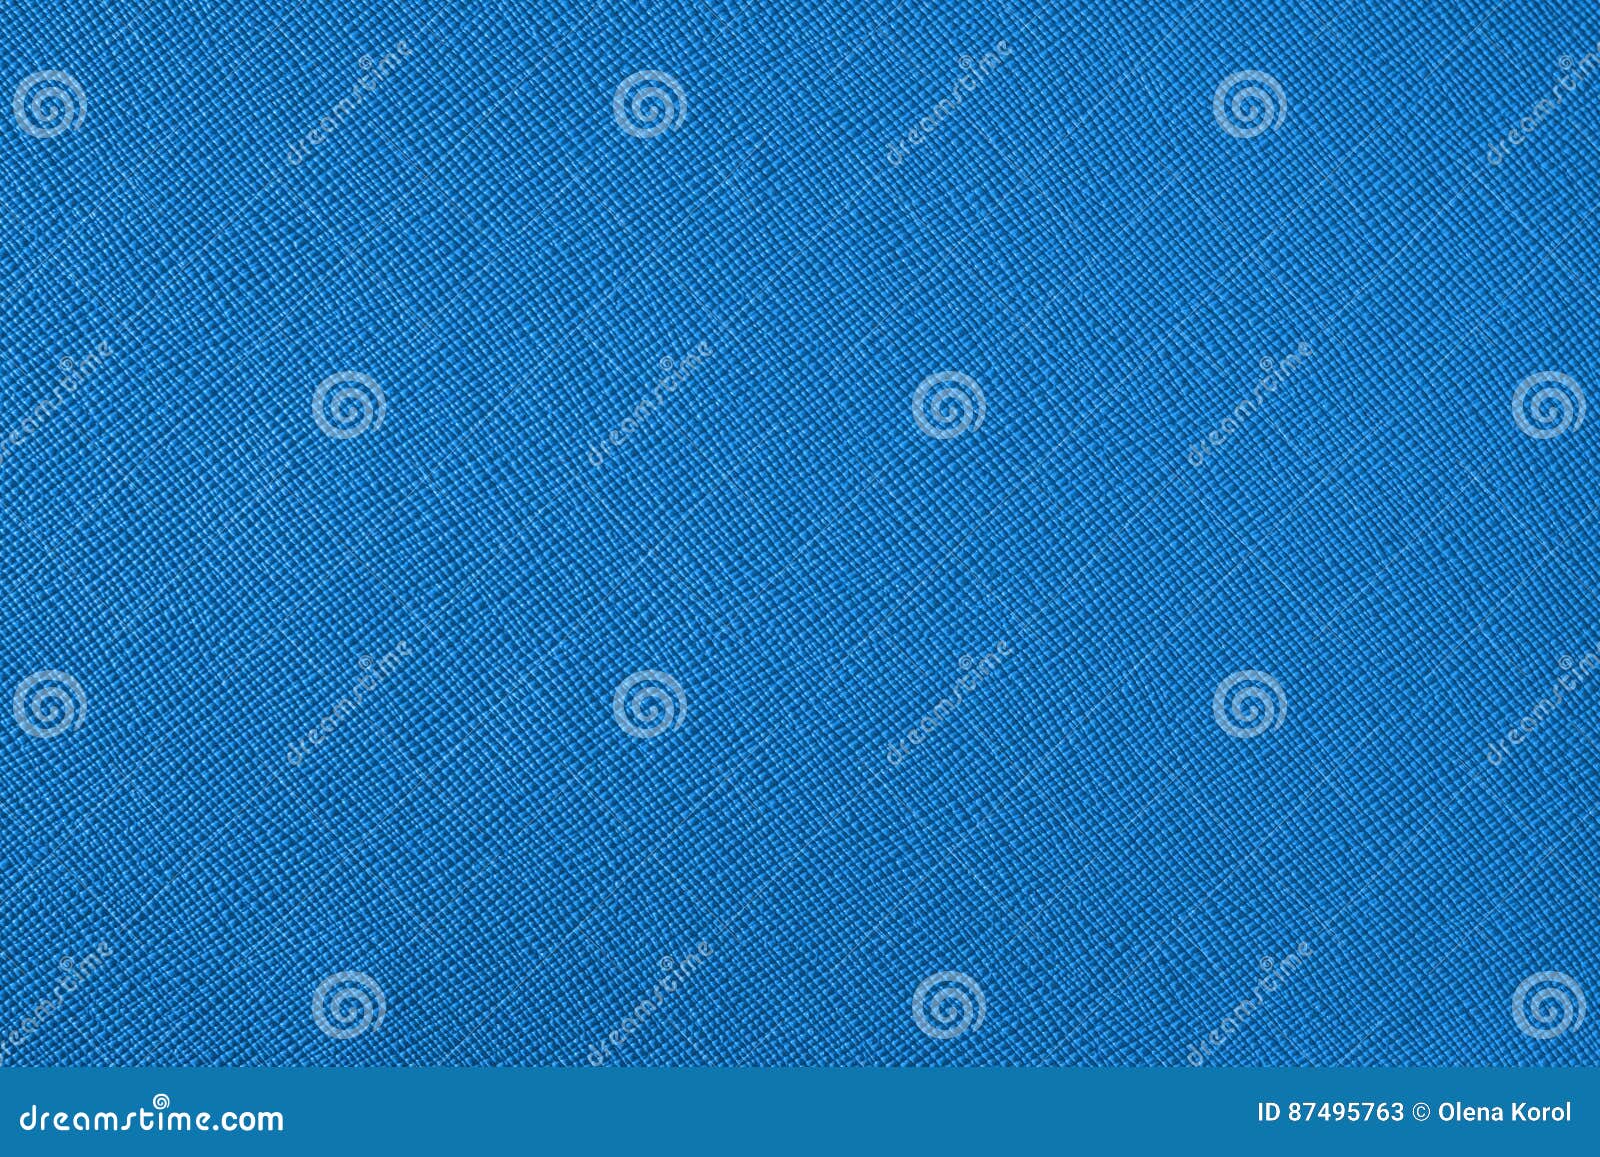 texture with a pattern of a plurality of lines. colored blue background